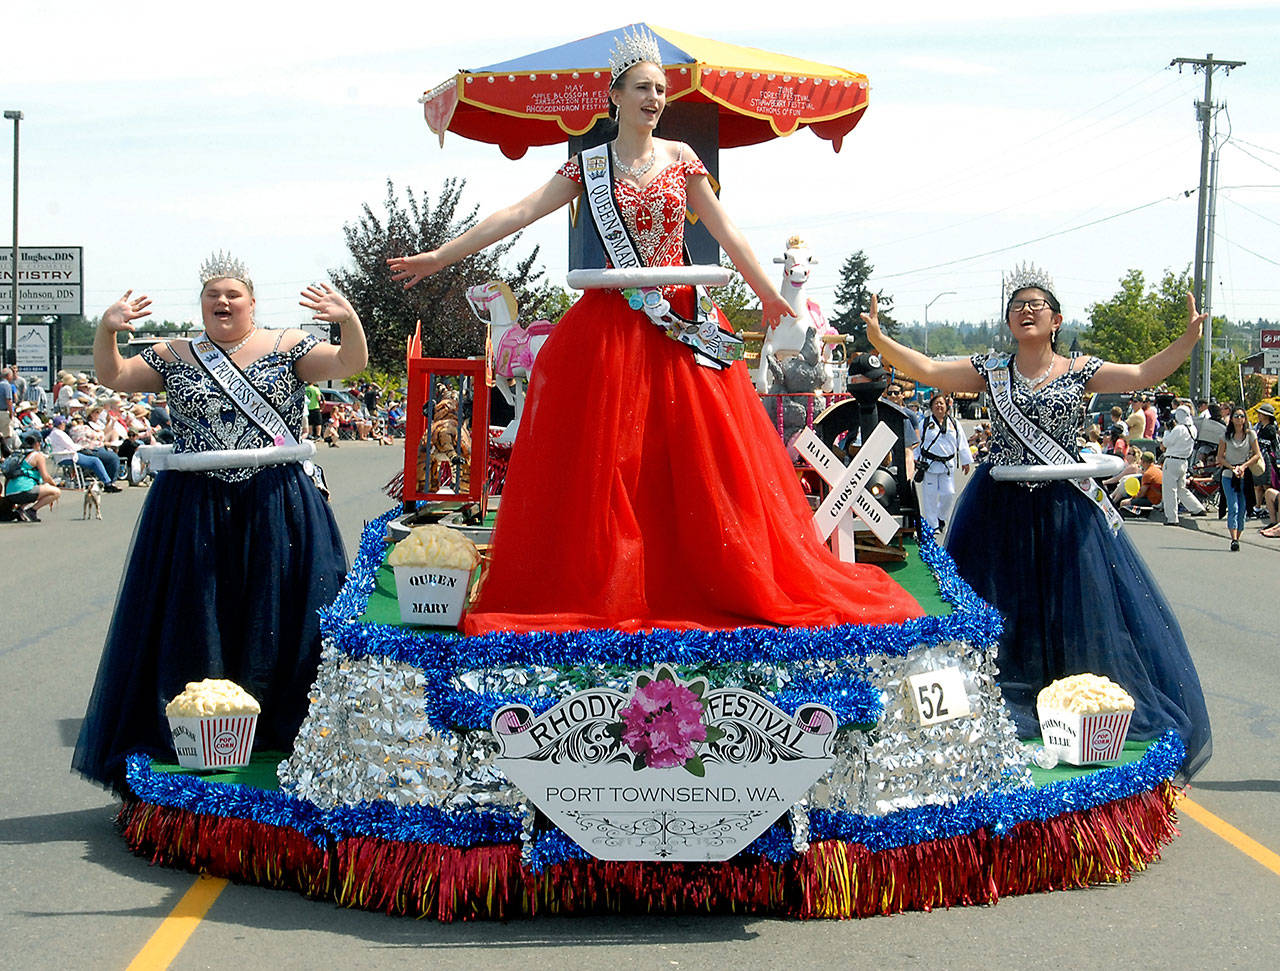 The 2019 Rhododendron Festival royalty, from left, Princess Kaylee Krajewski, Queen Mary Neville and Princess Ellie Thornton ride on their float during Saturday’s Irrigation Festival in Sequim. (Keith Thorpe/Peninsula Daily News)